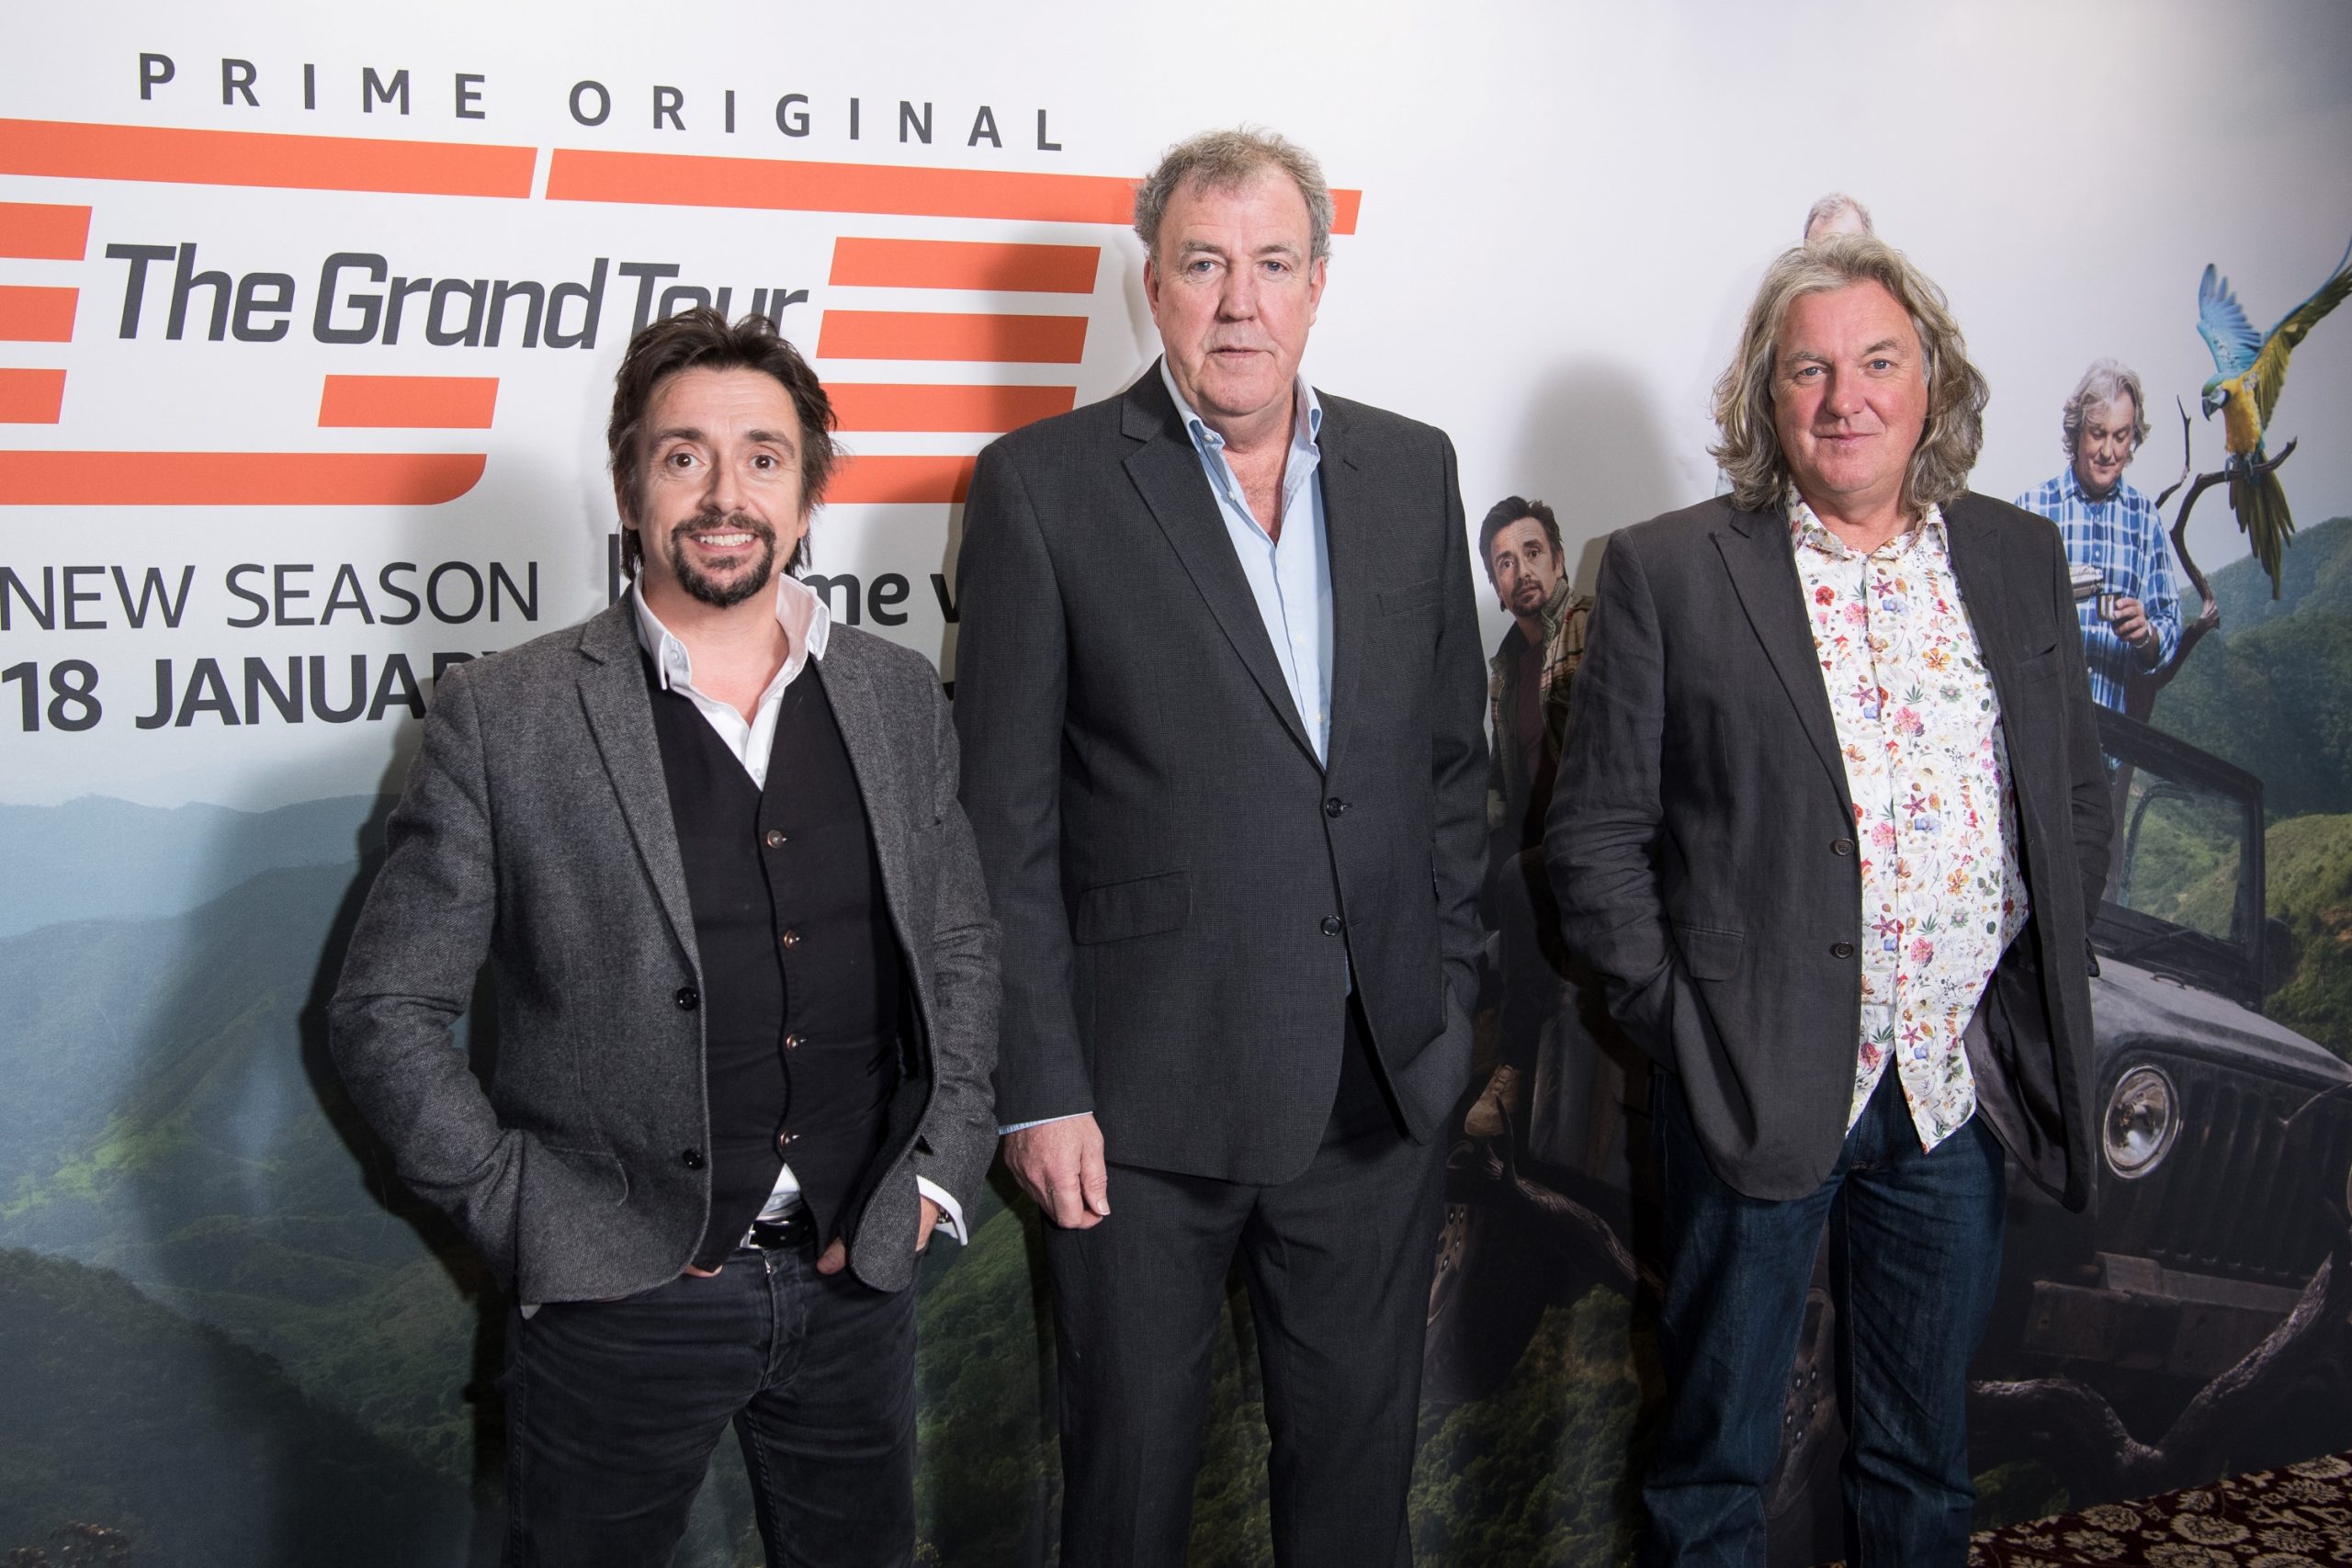 Richard Hammond, Jeremy Clarkson, and James May attend a screening of 'The Grand Tour' season 3 car show.